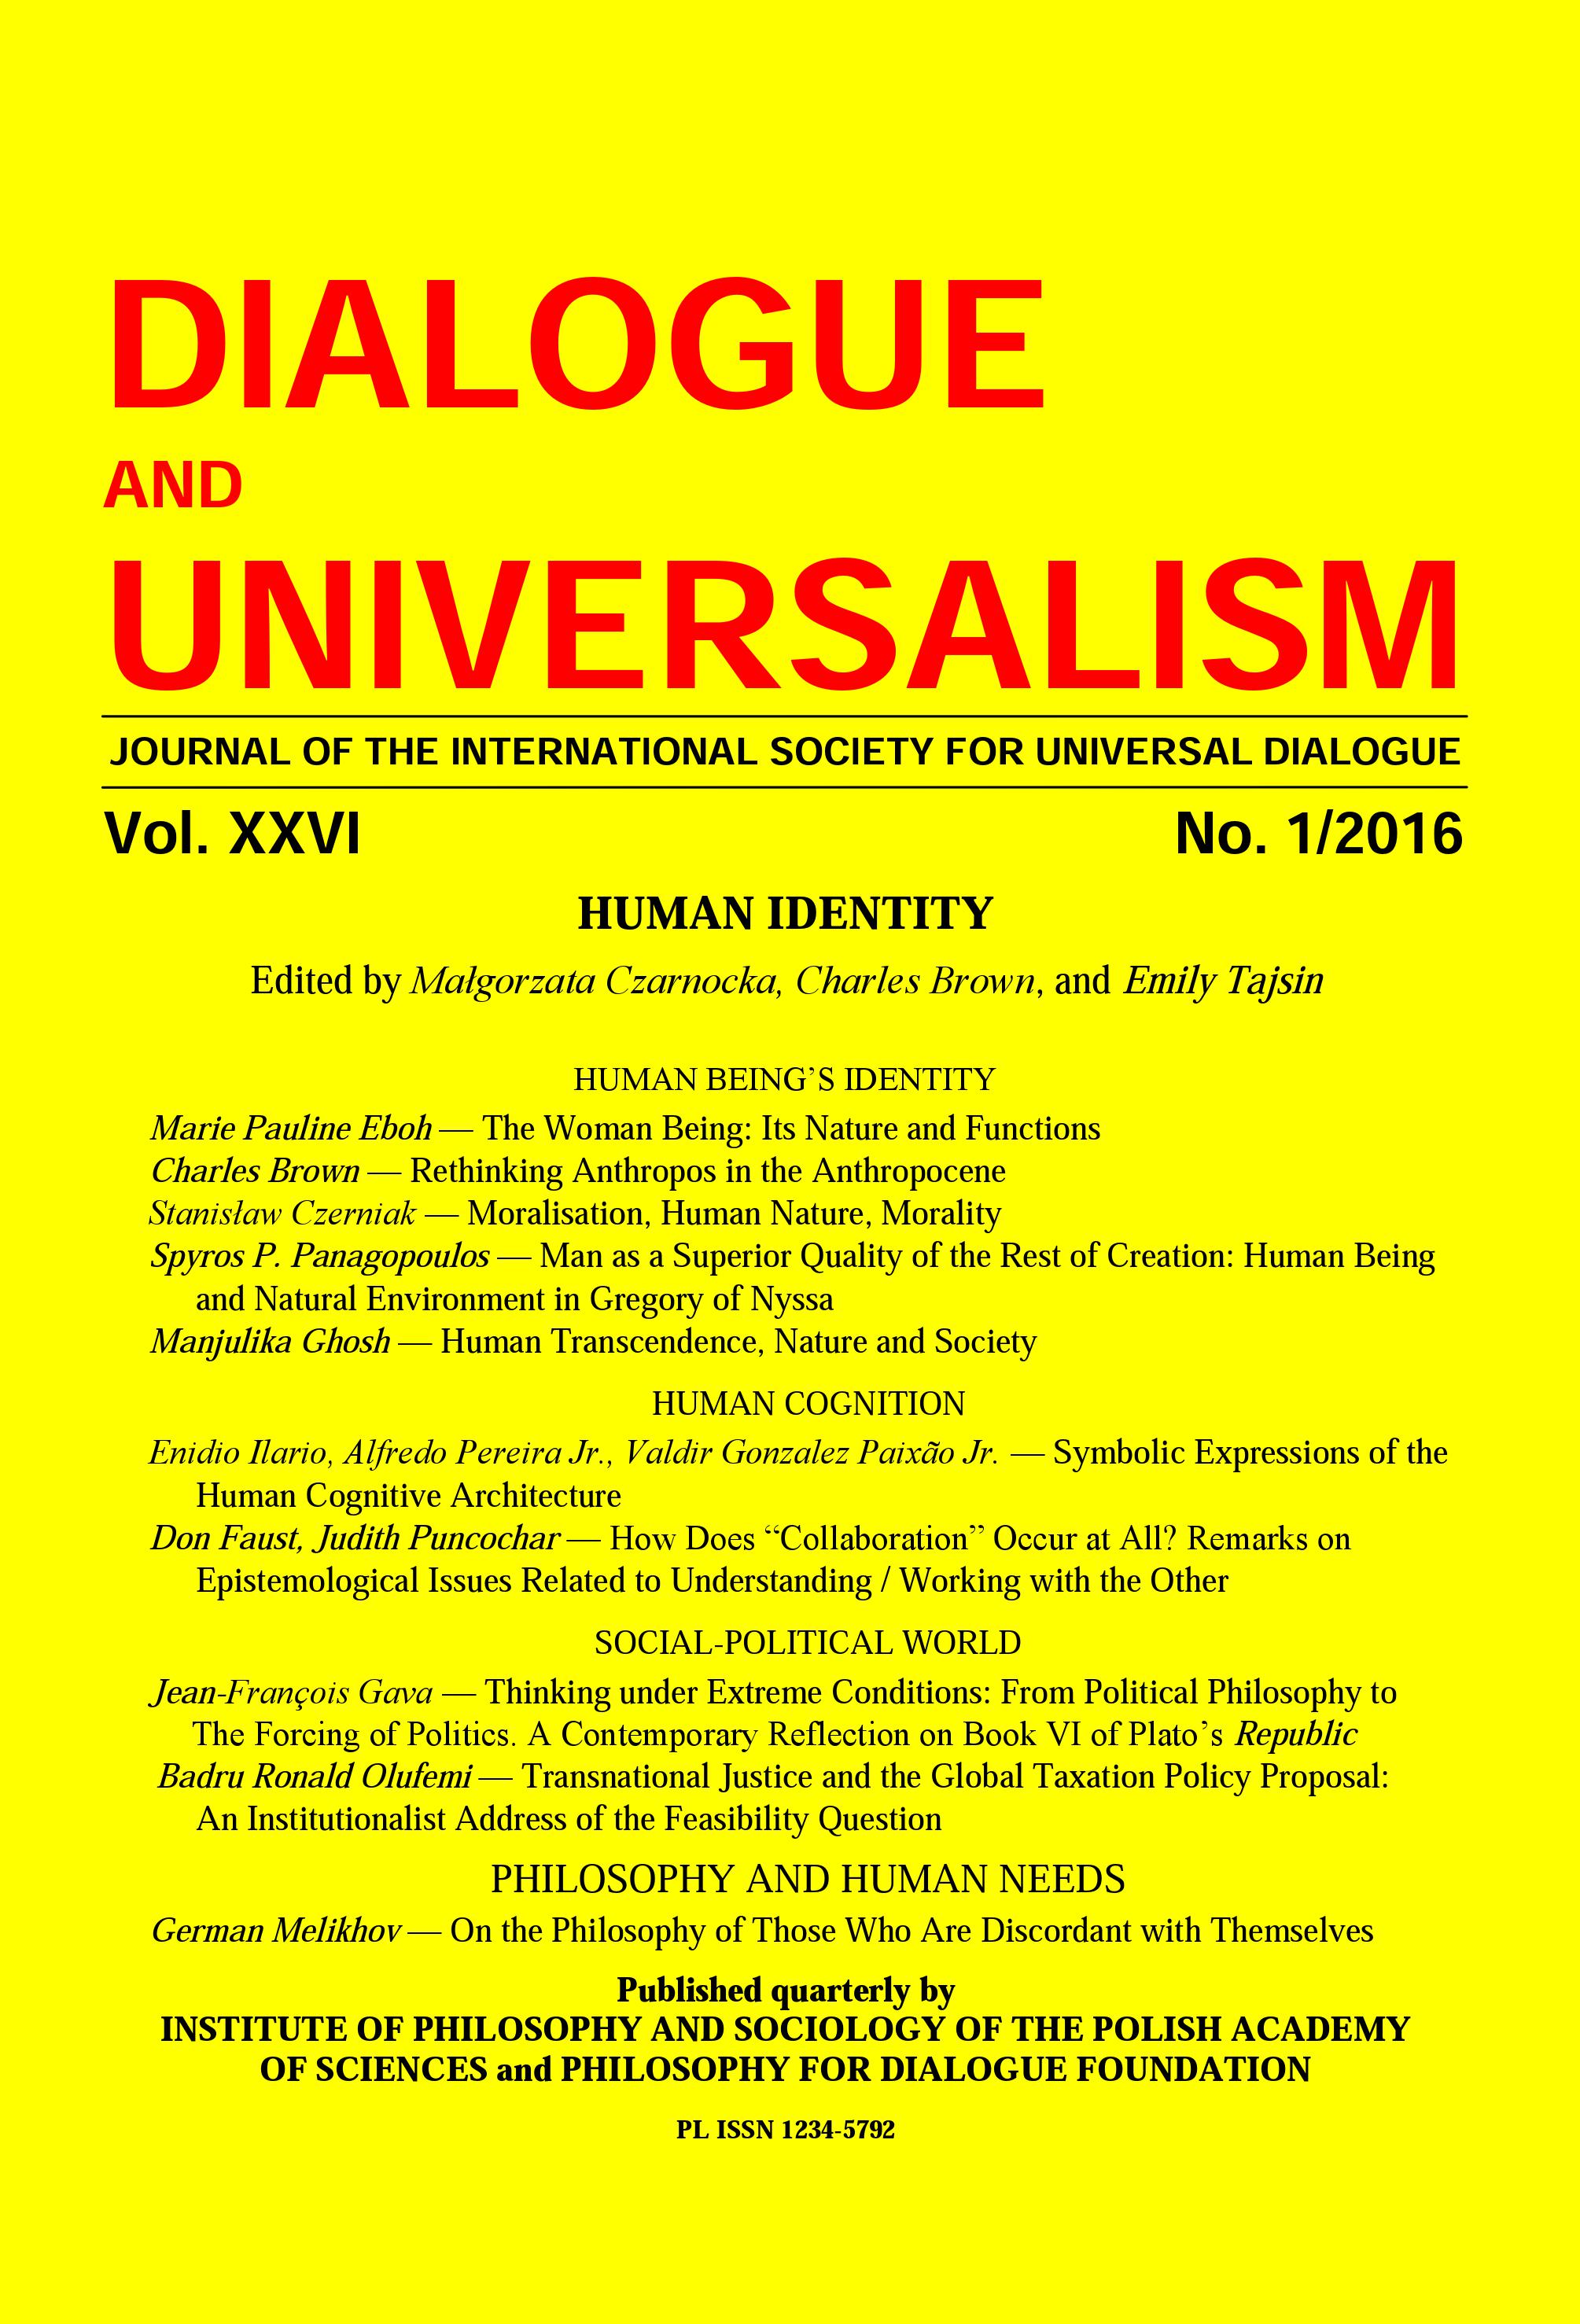 HUMAN IDENTITY Cover Image